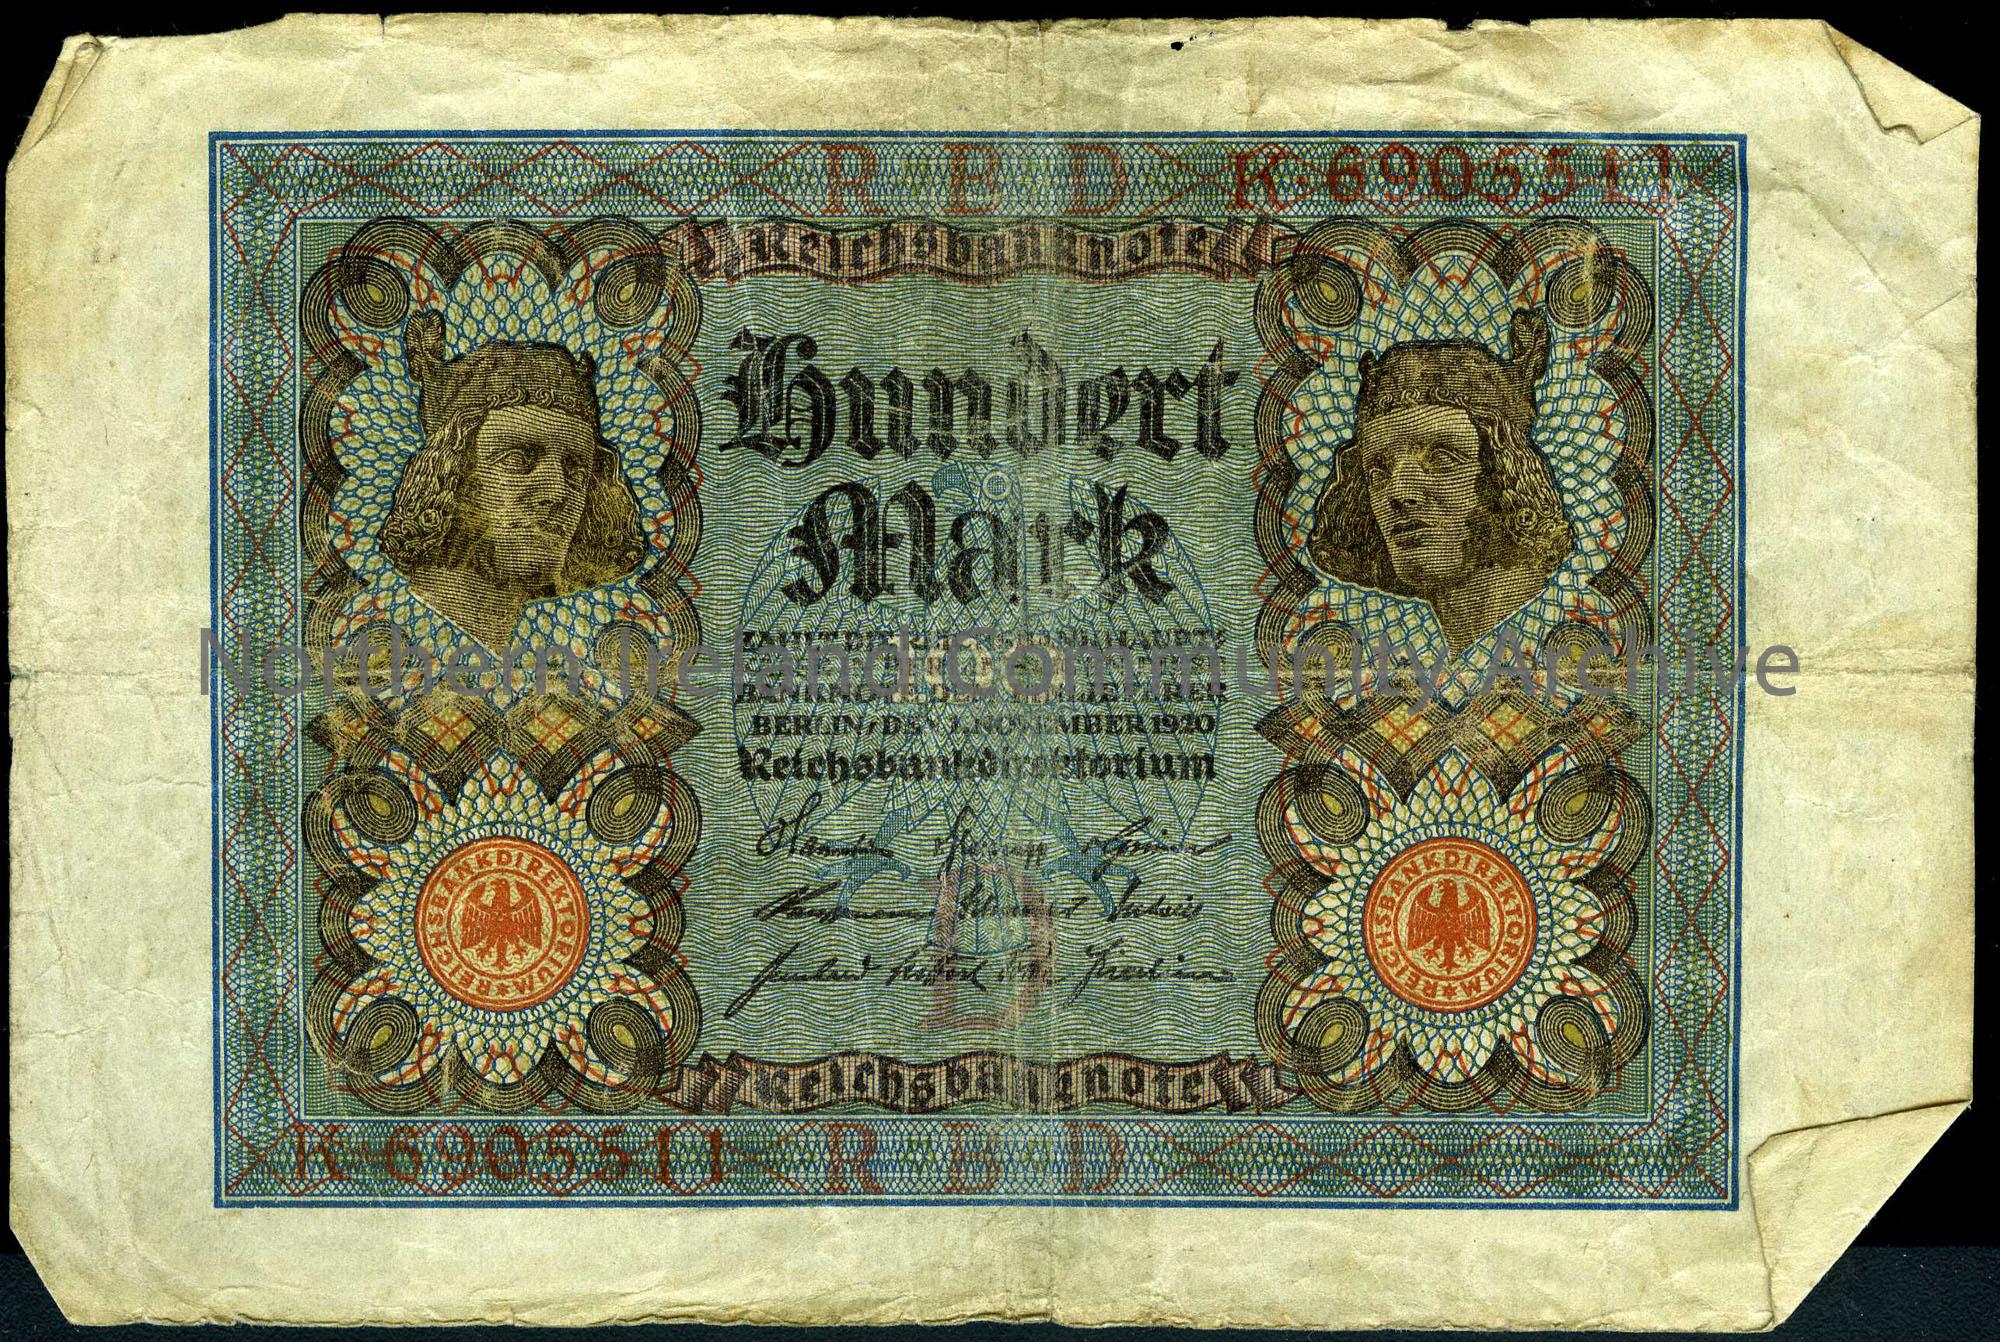 German bank note for 100 marks